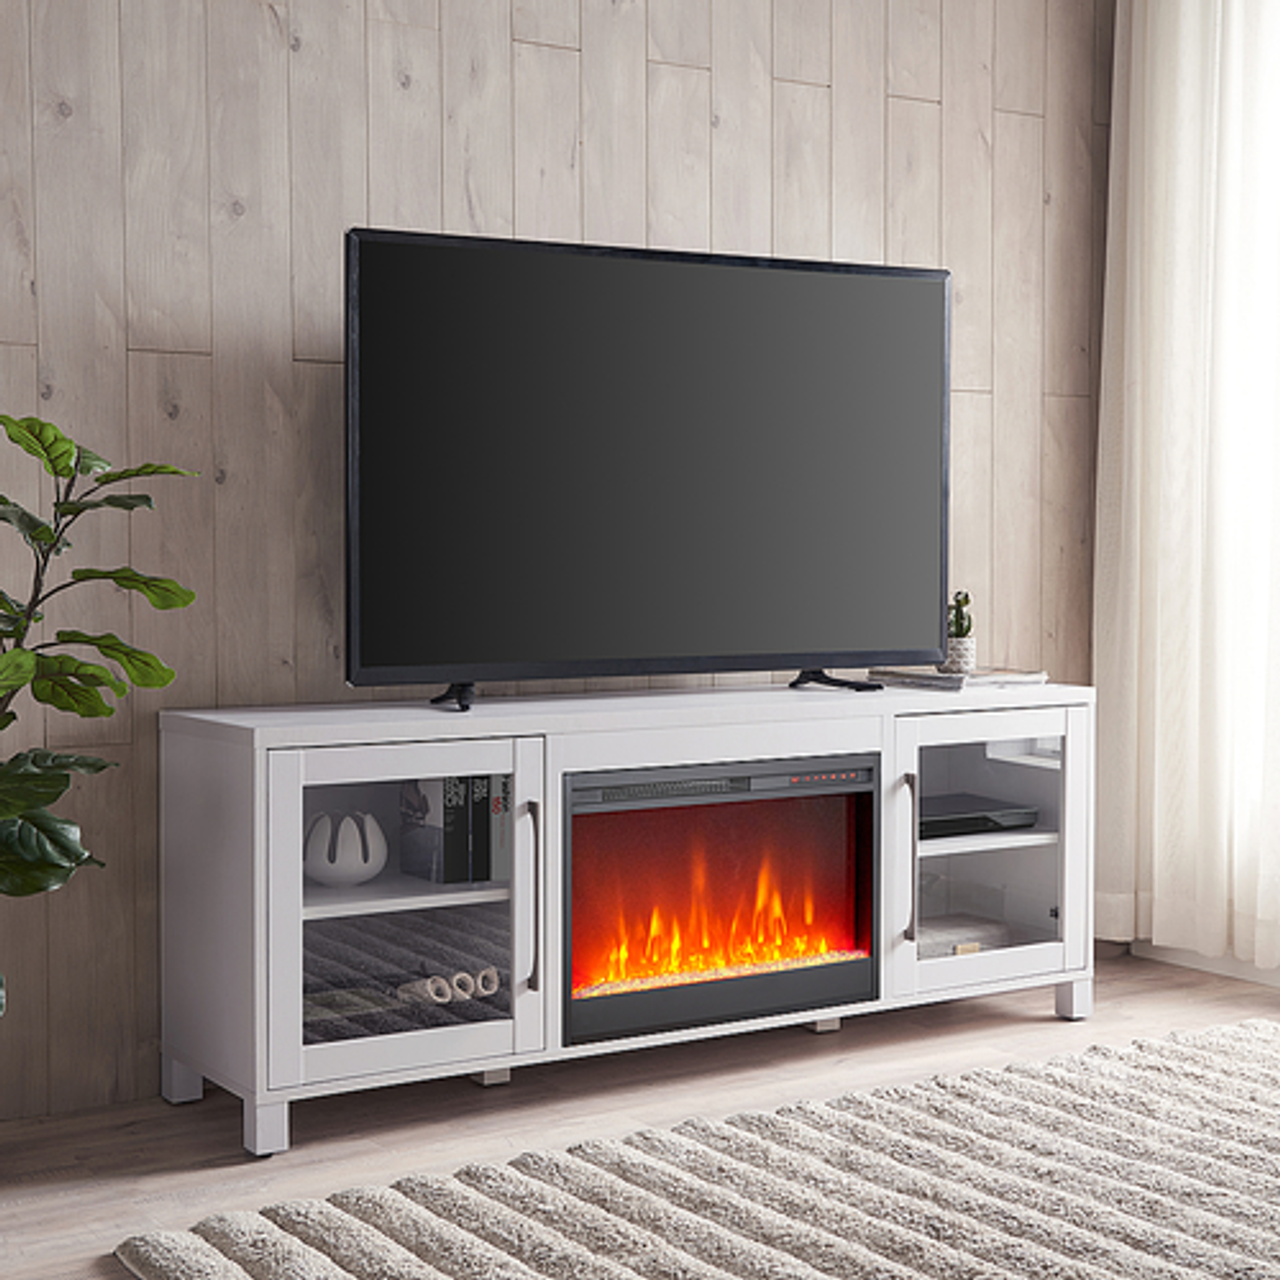 Camden&Wells - Quincy Crystal Fireplace TV Stand for TVs up to 80" - White